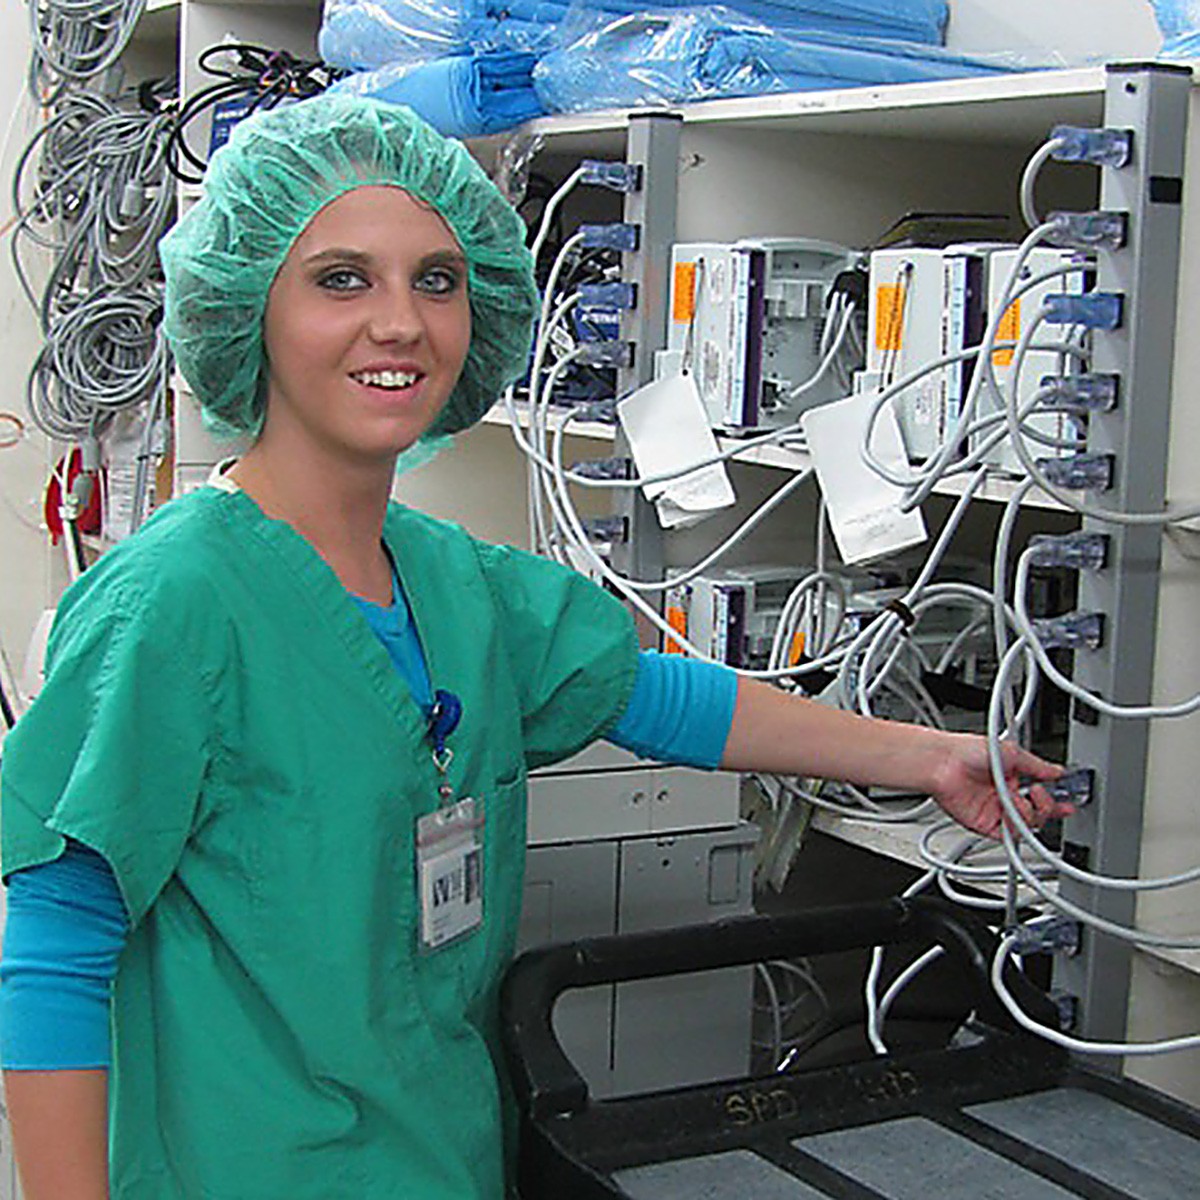 Smiling woman wearing medical scrubs and cap plugs in equipment.